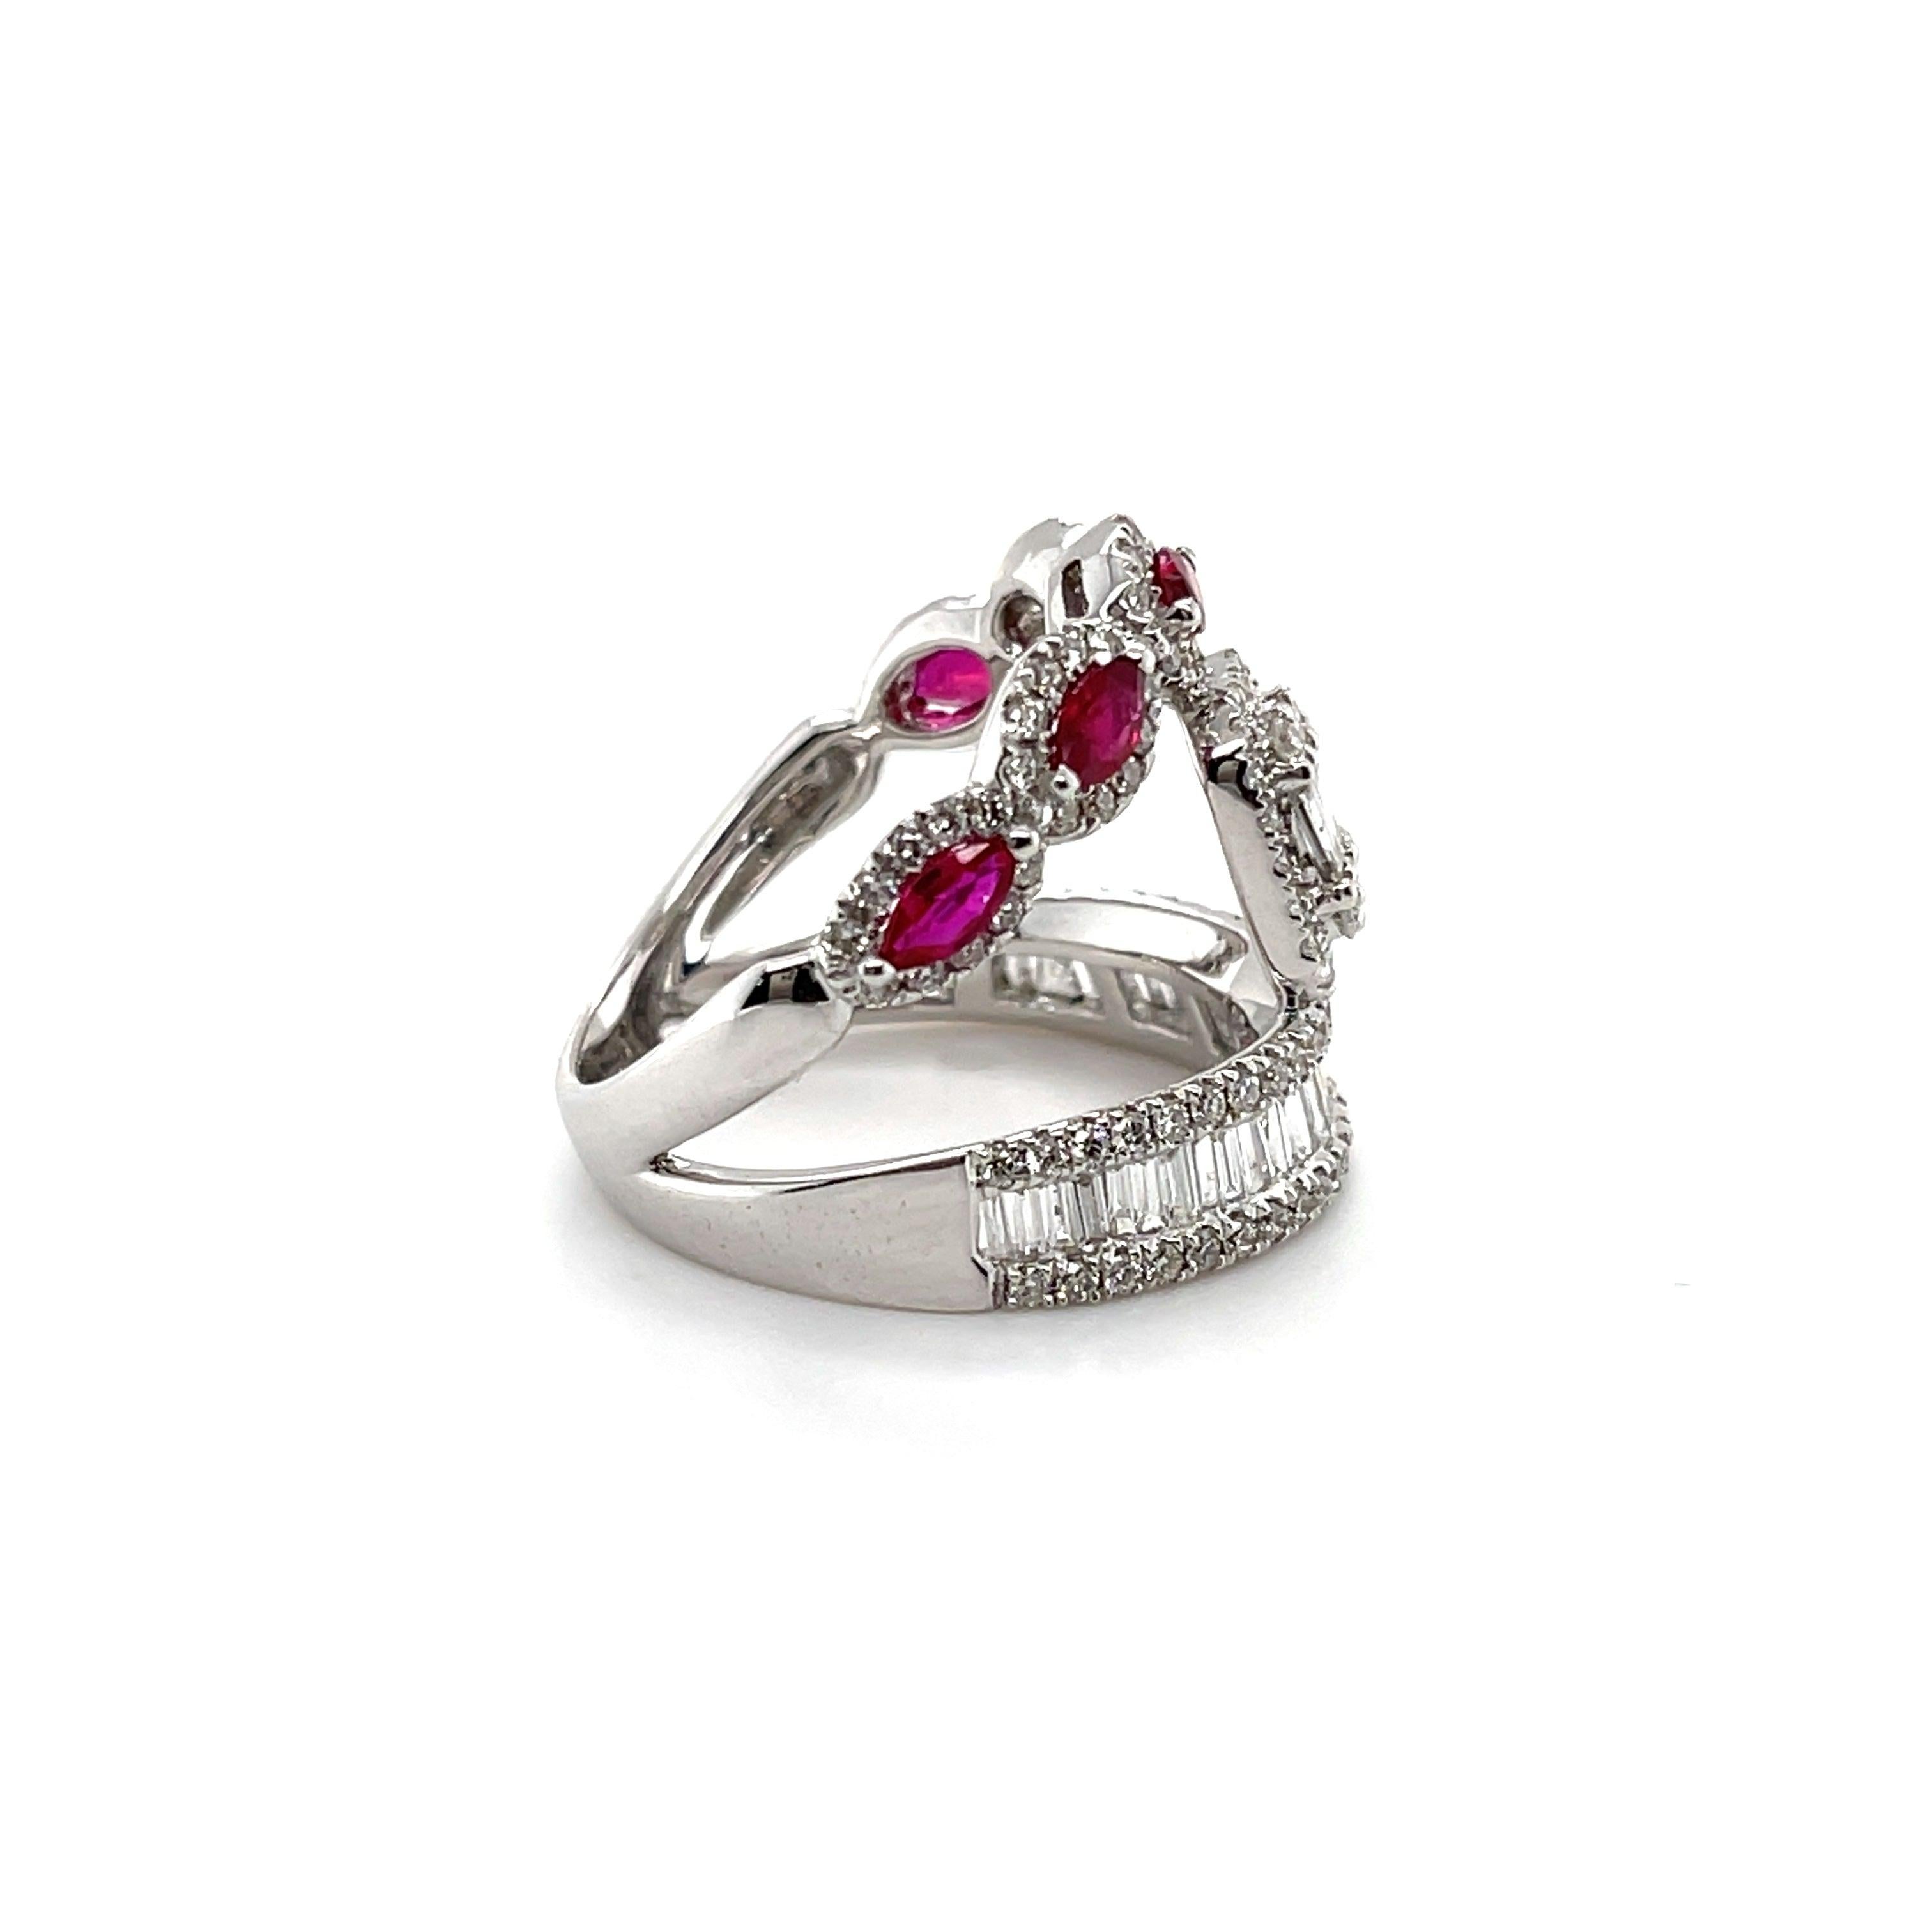 Rubies and Diamonds, crafted with eighteen karat white gold, complemented by a stunning polished finish design.

Perfect for your valentines gift! 

Complimentary Ring Resize! 

5 Marquise Ruby weight: 0.71ct 

122 Round Diamond weight: 0.92ct 

33